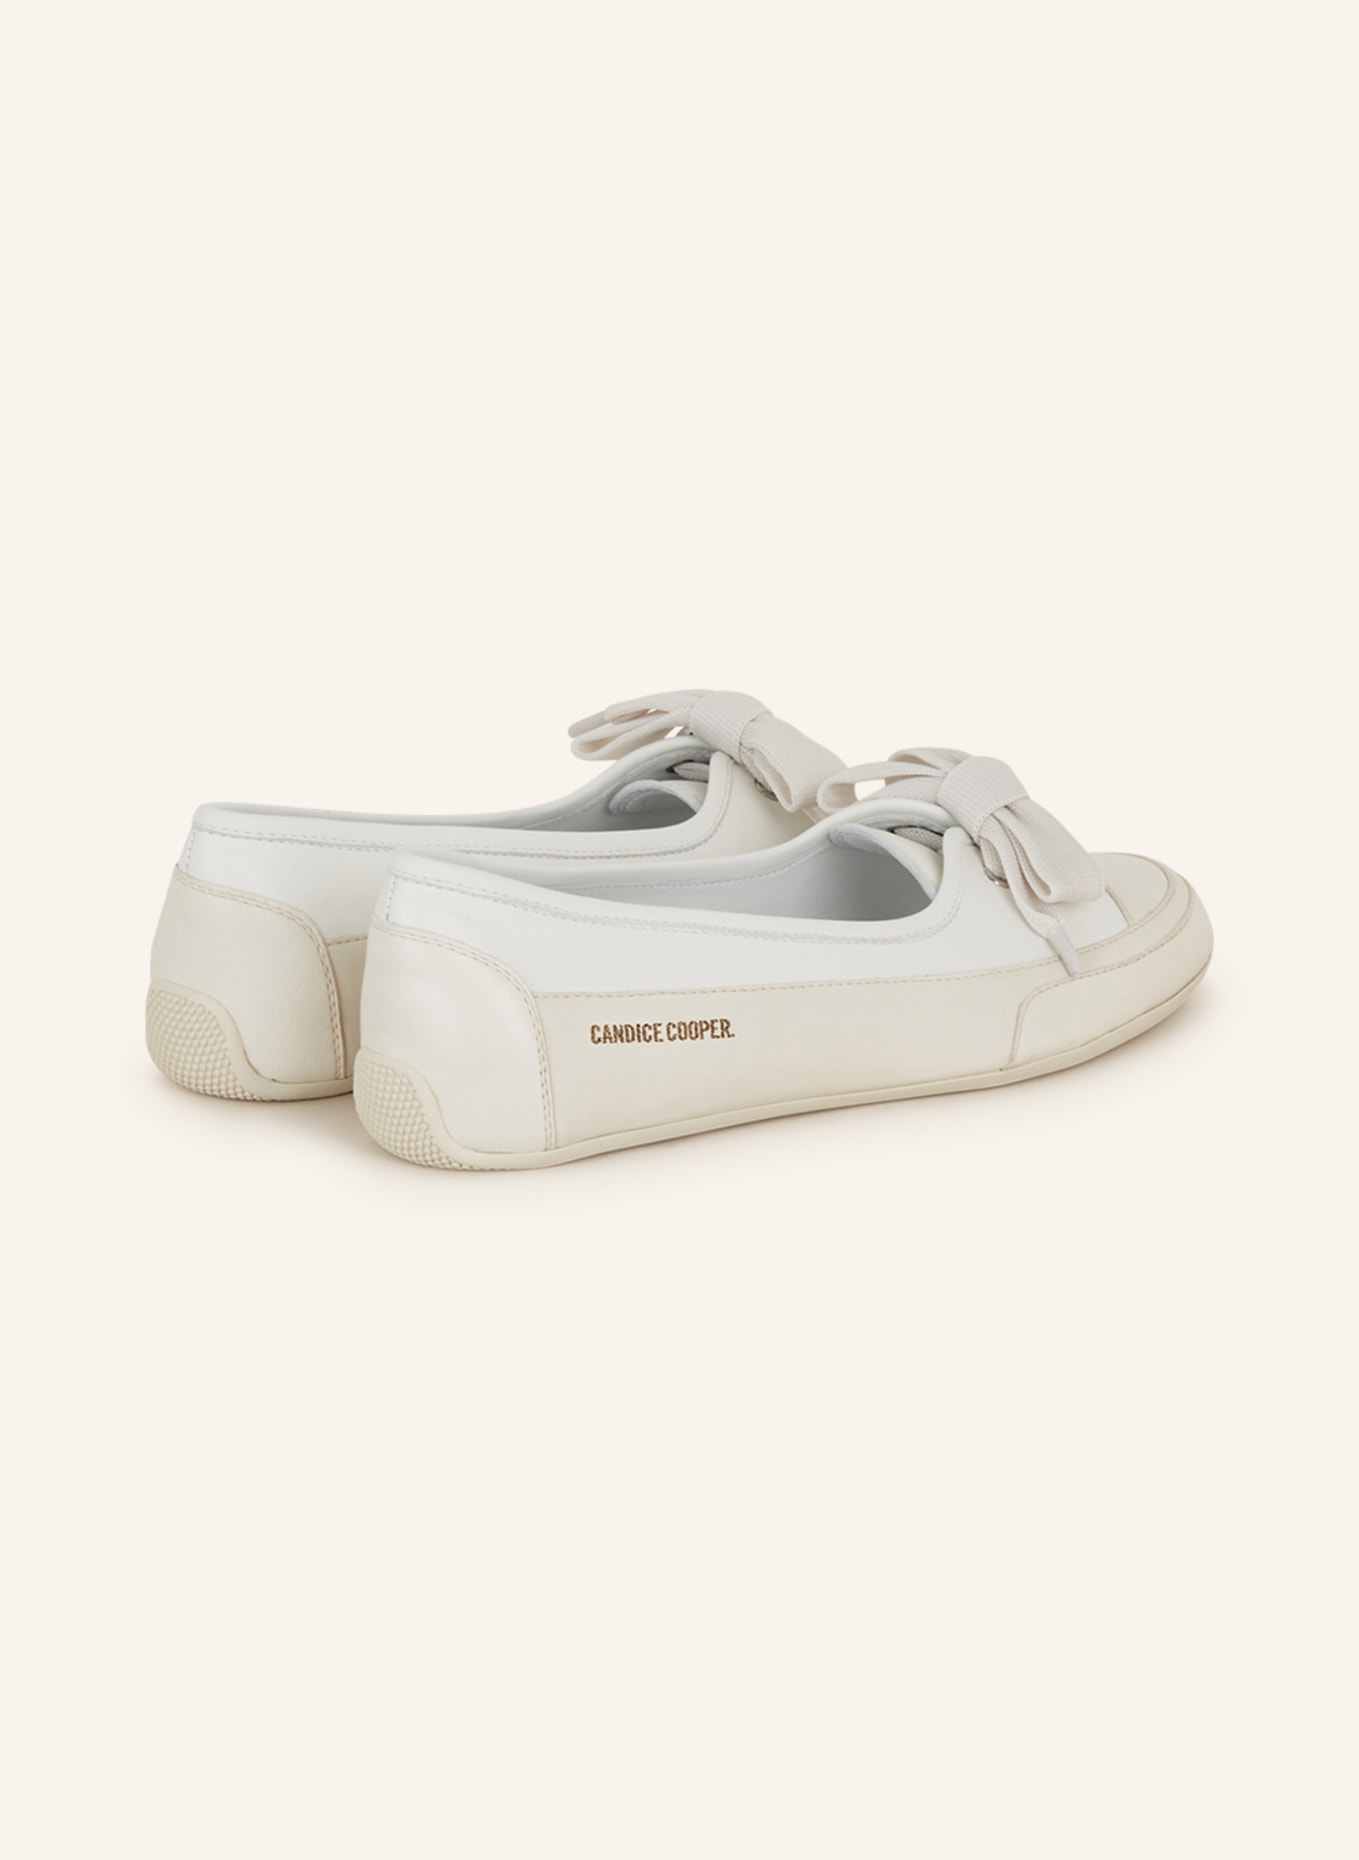 Candice Cooper Ballet flats CANDY BOW, Color: CREAM/ WHITE (Image 2)